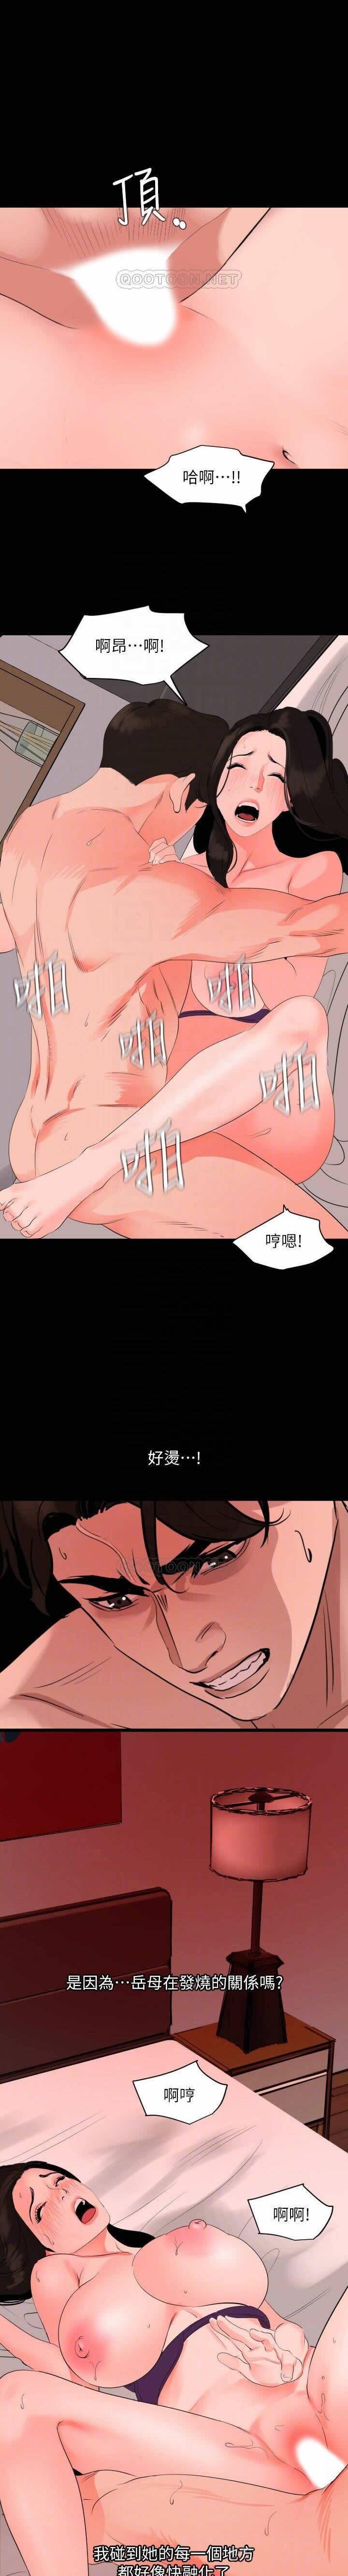 Amateur 與岳母同屋-SON IN LAW 32-51 CHI (MANHWAROSHIXP) Bald Pussy - Page 9